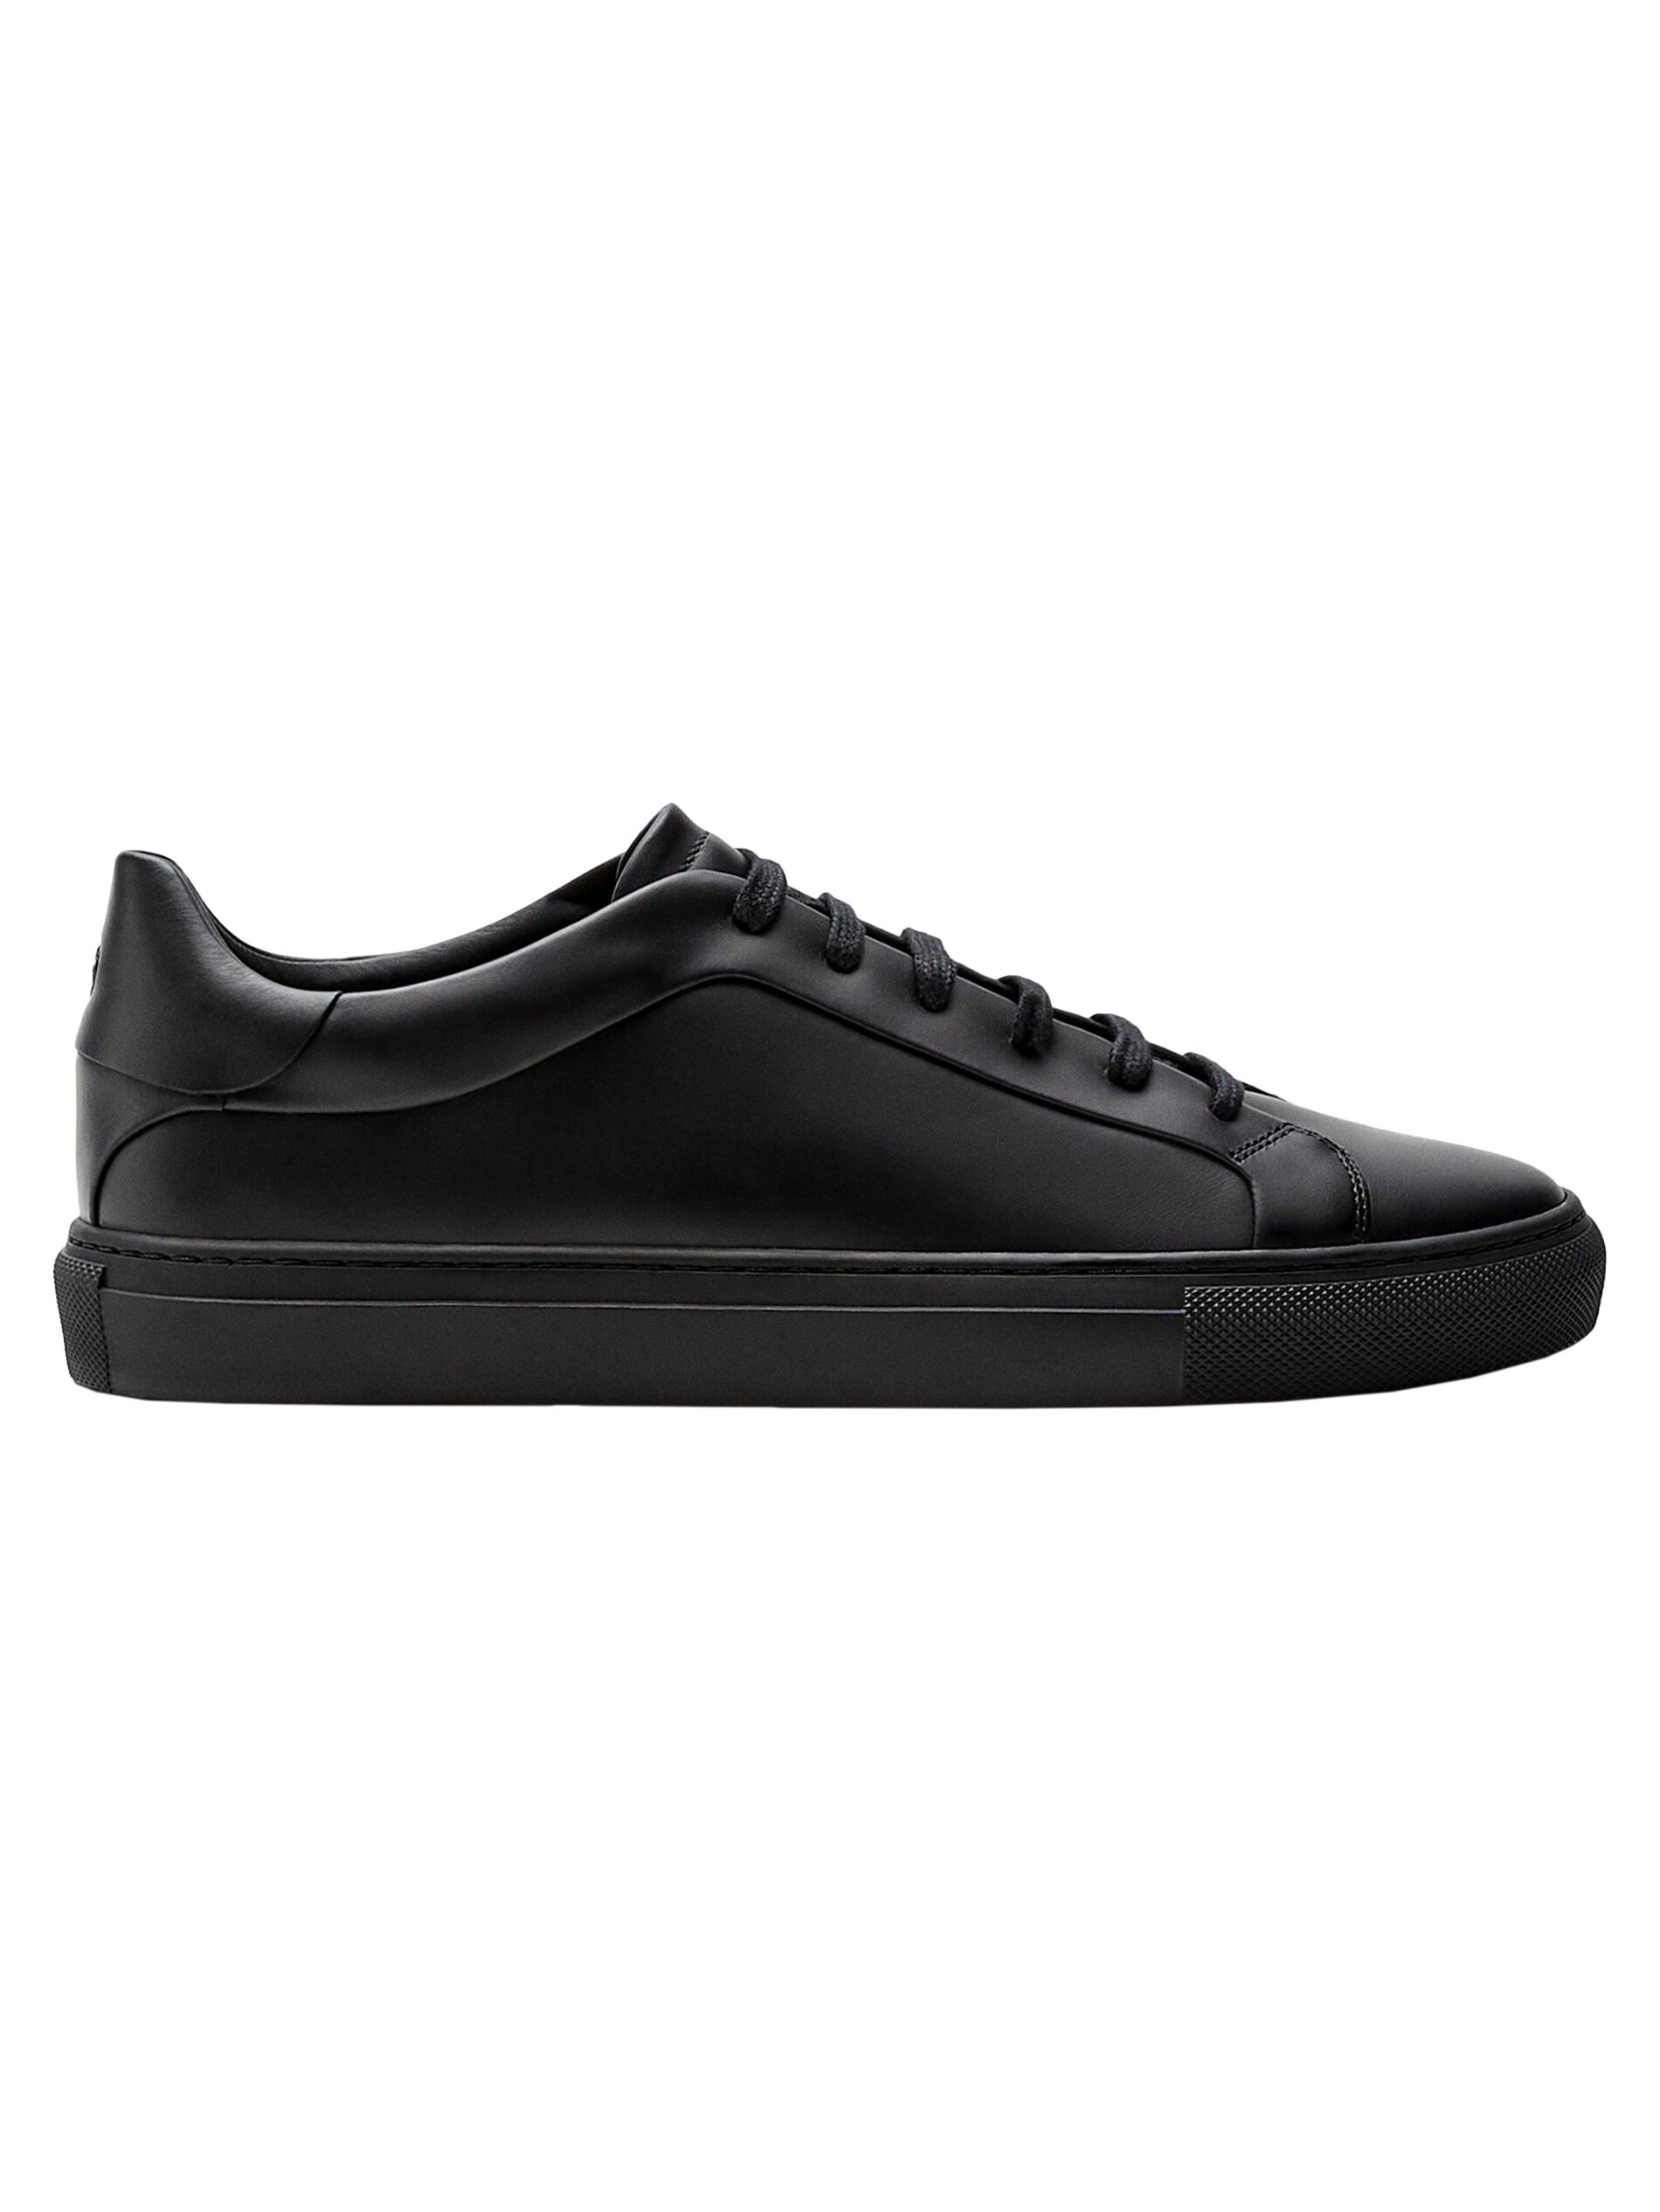 trainers black leather